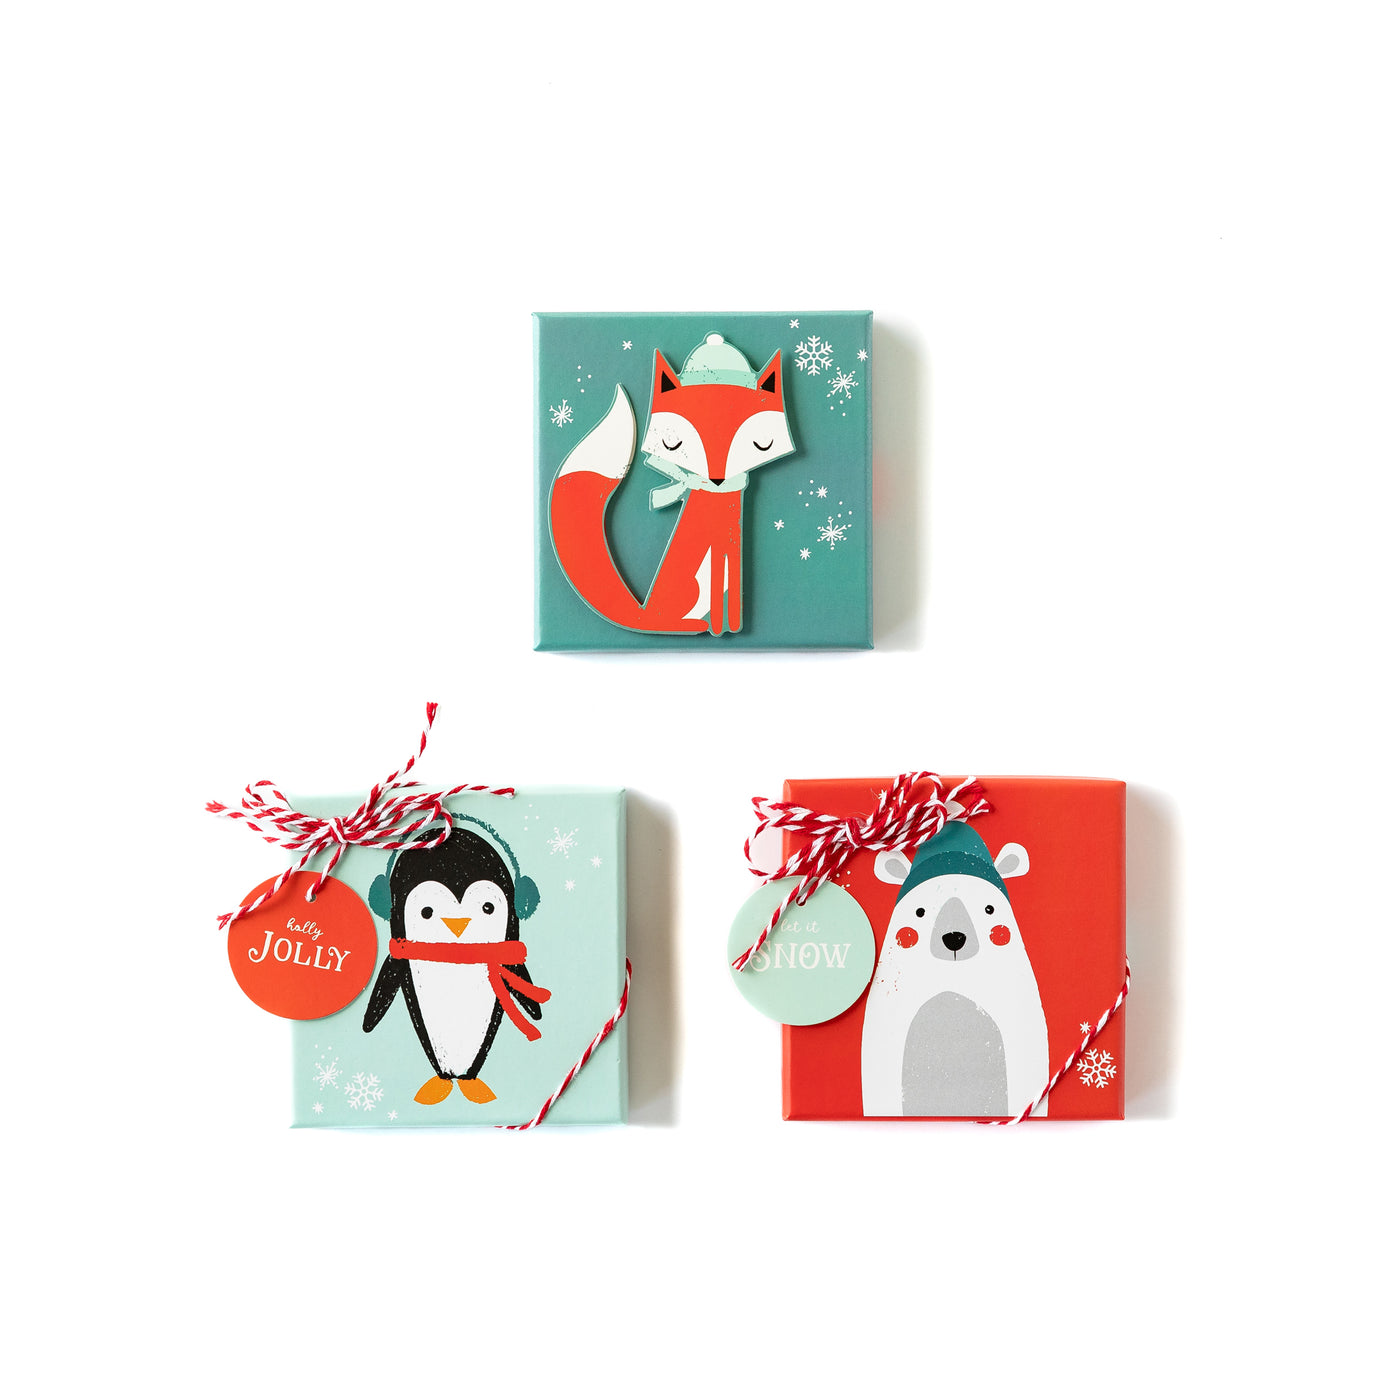 PLGC32 - Jolly Animals Gift Card Boxes